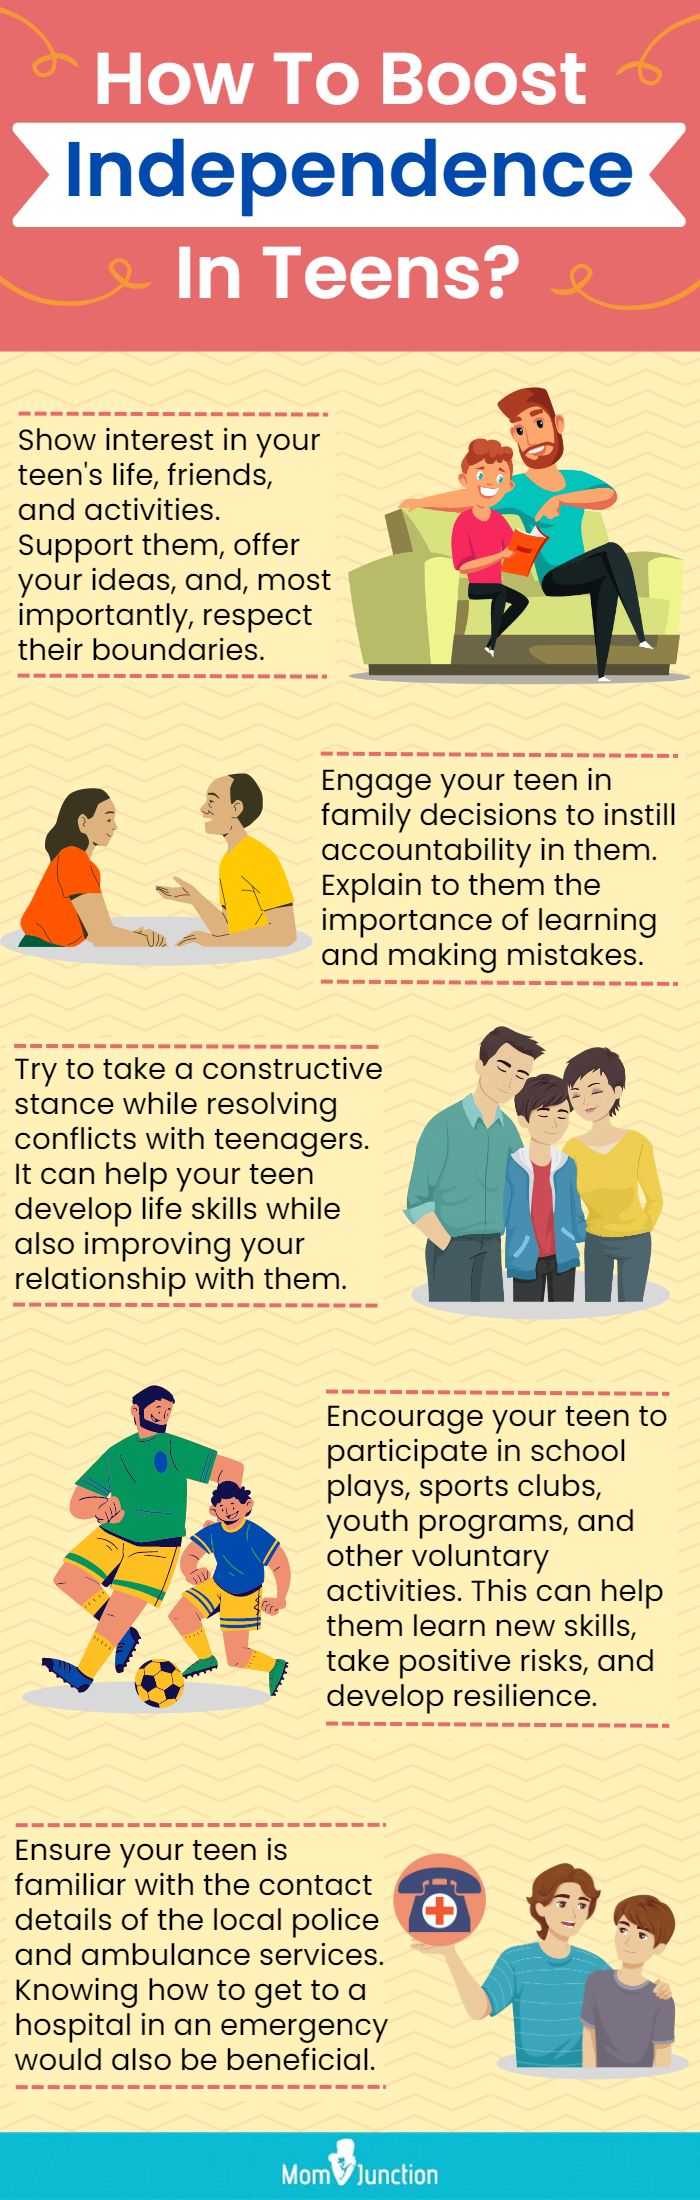 how to boost independence in teens (infographic)